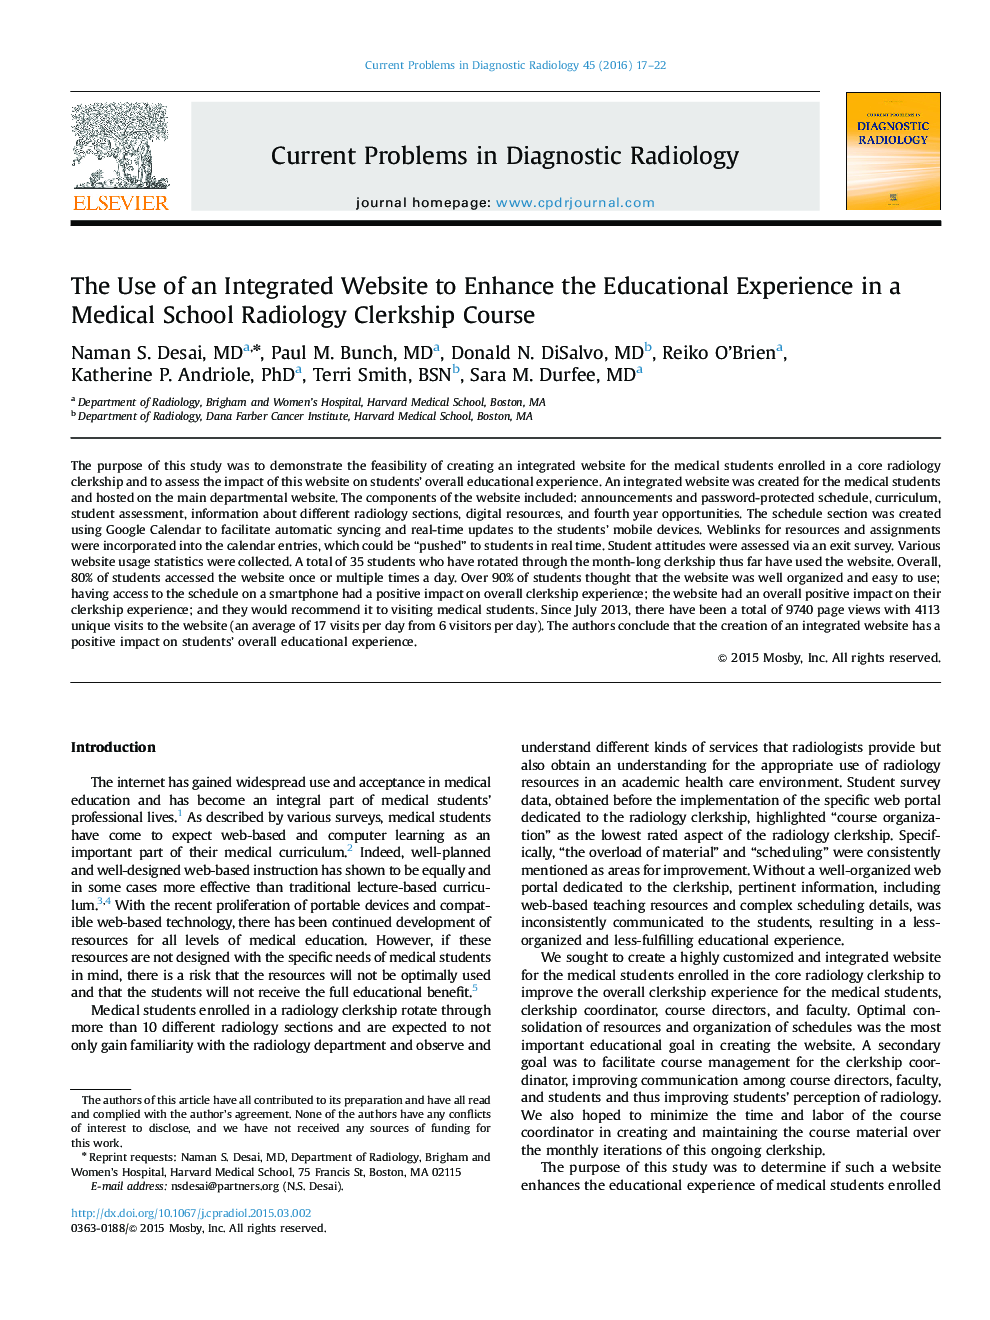 The Use of an Integrated Website to Enhance the Educational Experience in a Medical School Radiology Clerkship Course 